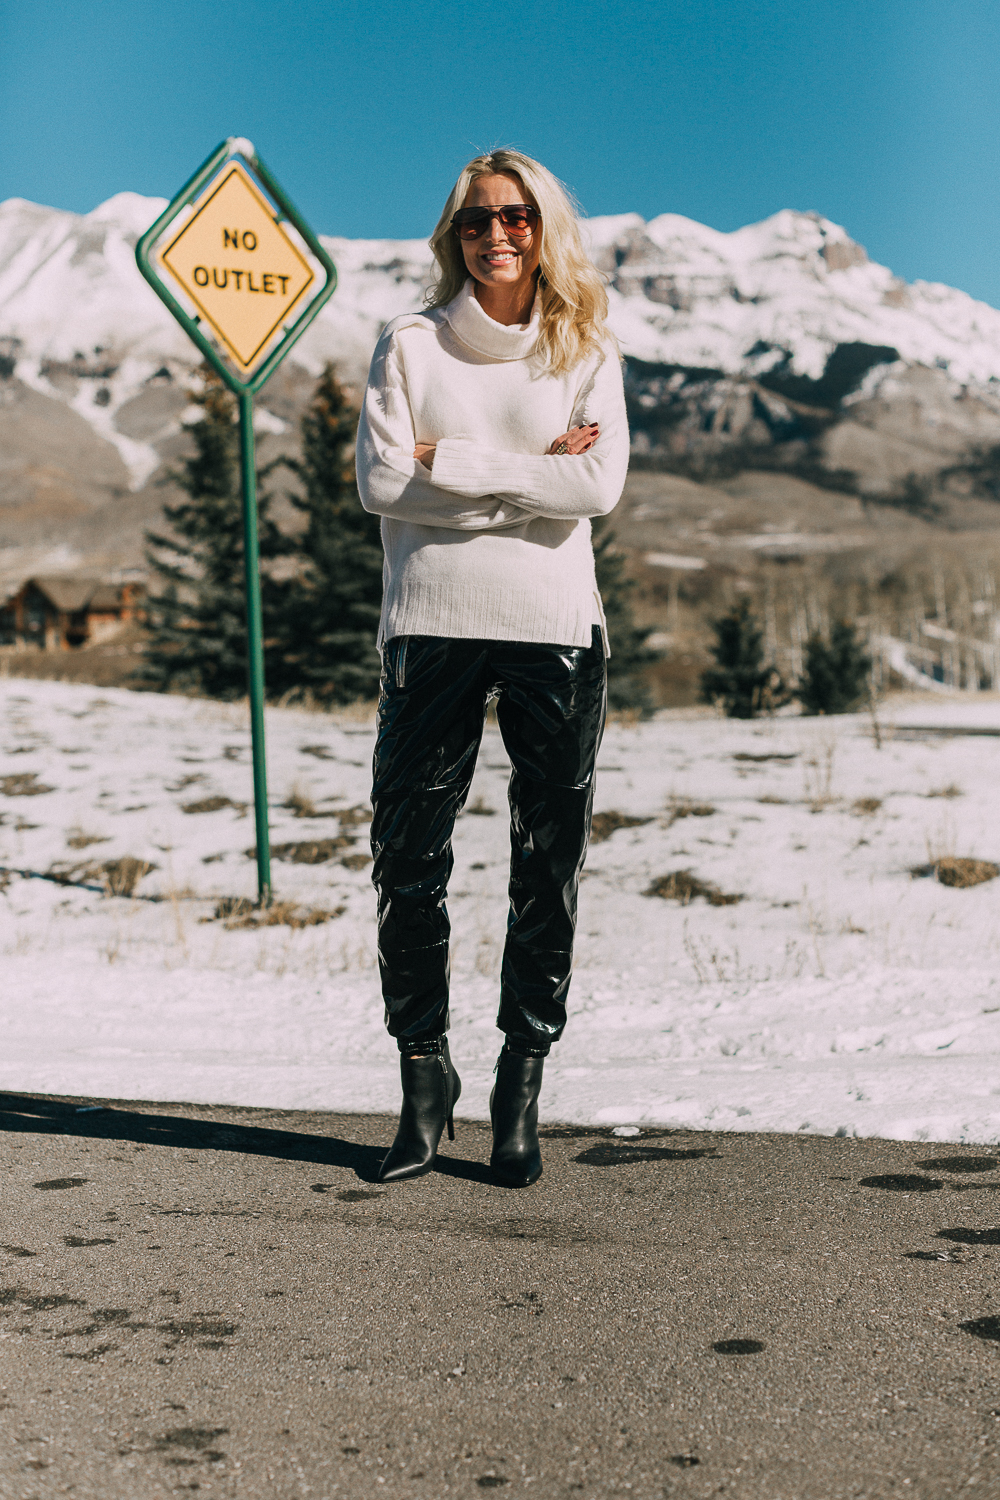 Black vinyl pants by RtA worn with a white turtleneck cashmere sweater by Brochu Walker with black booties by Michael Kors worn by blonde fashion blogger Erin Busbee of Busbee Style